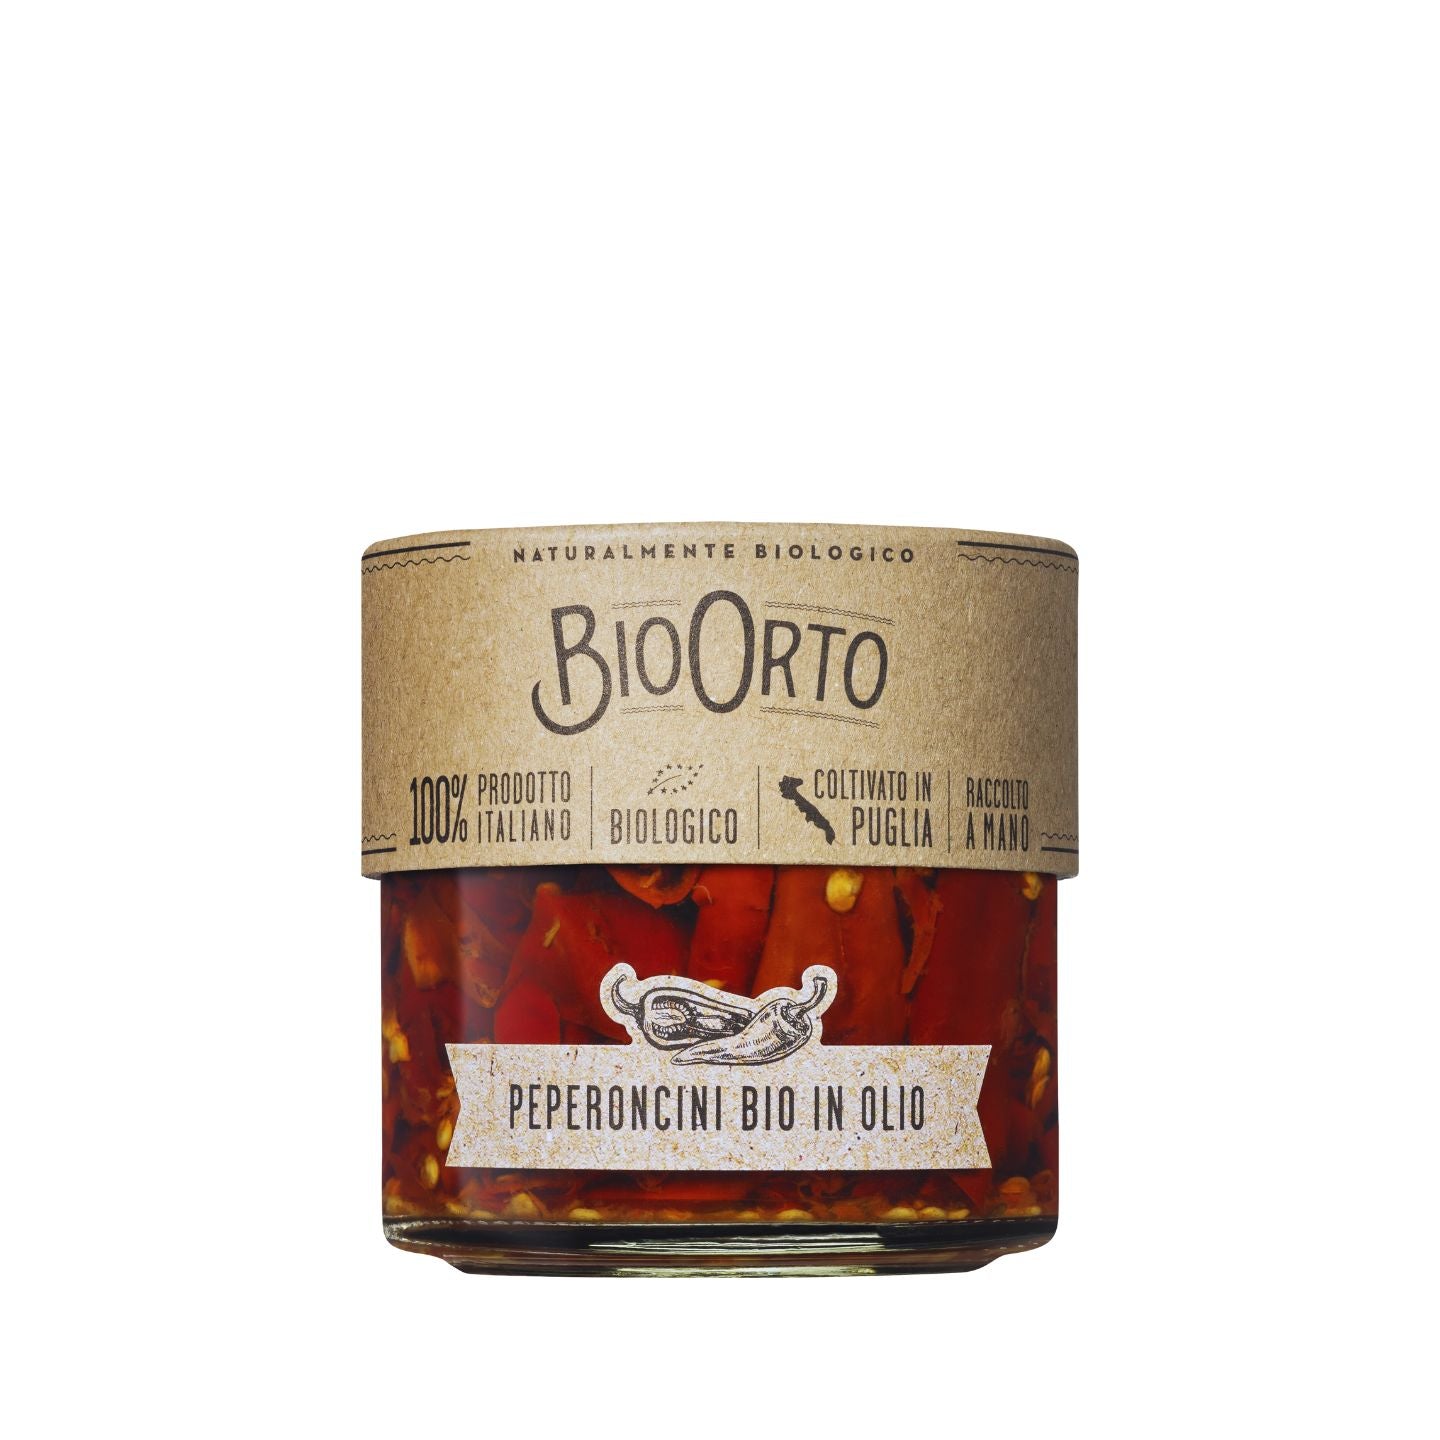 Bio Orto Organic Red Hot Chilli Peppers in Extra Virgin Olive Oil 175g  | Imported and distributed in the UK by Just Gourmet Foods